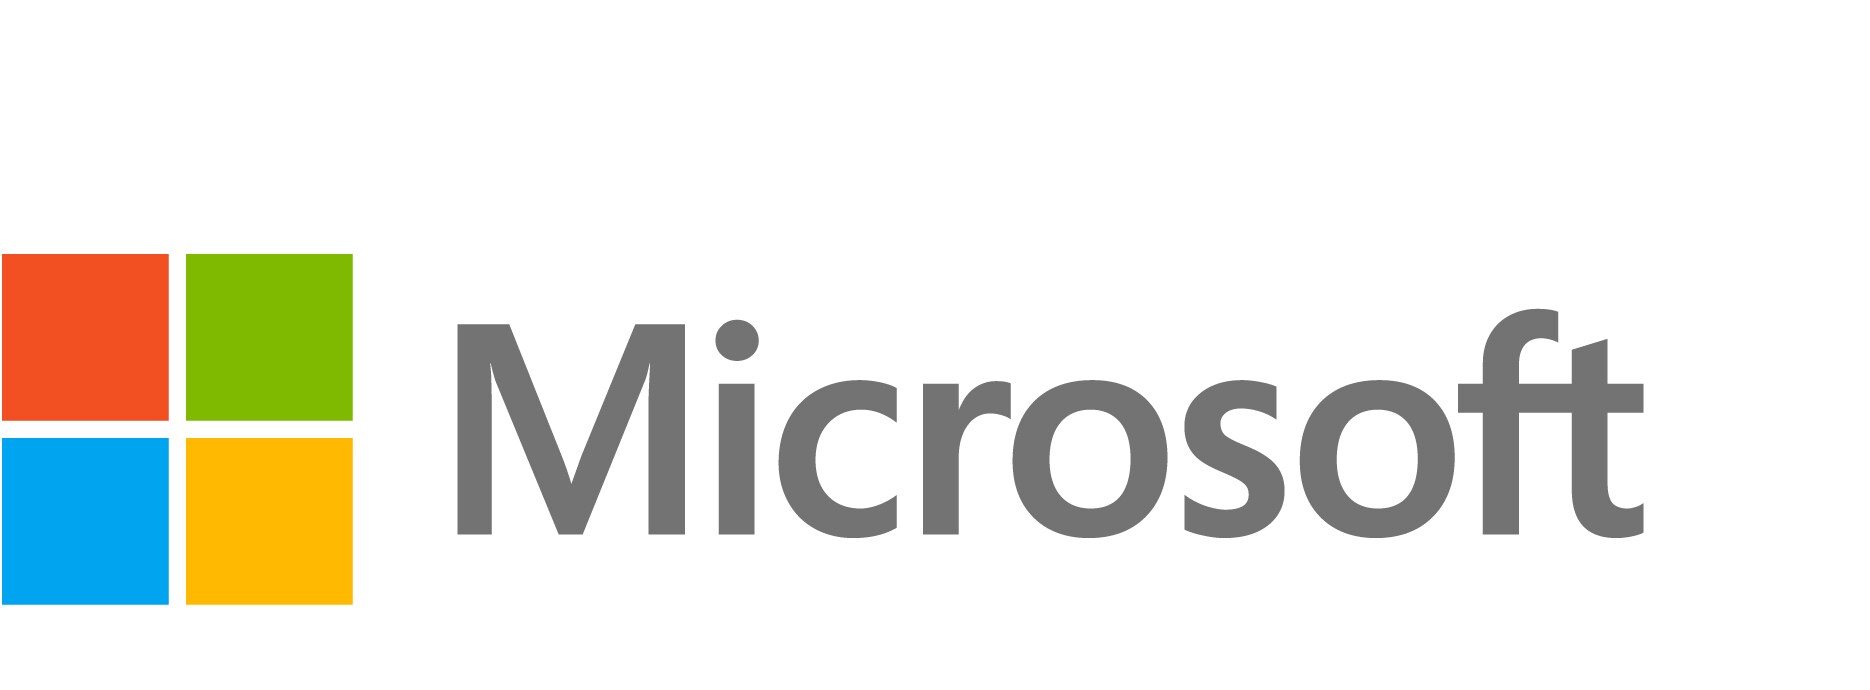 Microsoft Power Pages - subscription license (1 year) - 500 anonymous users per web site